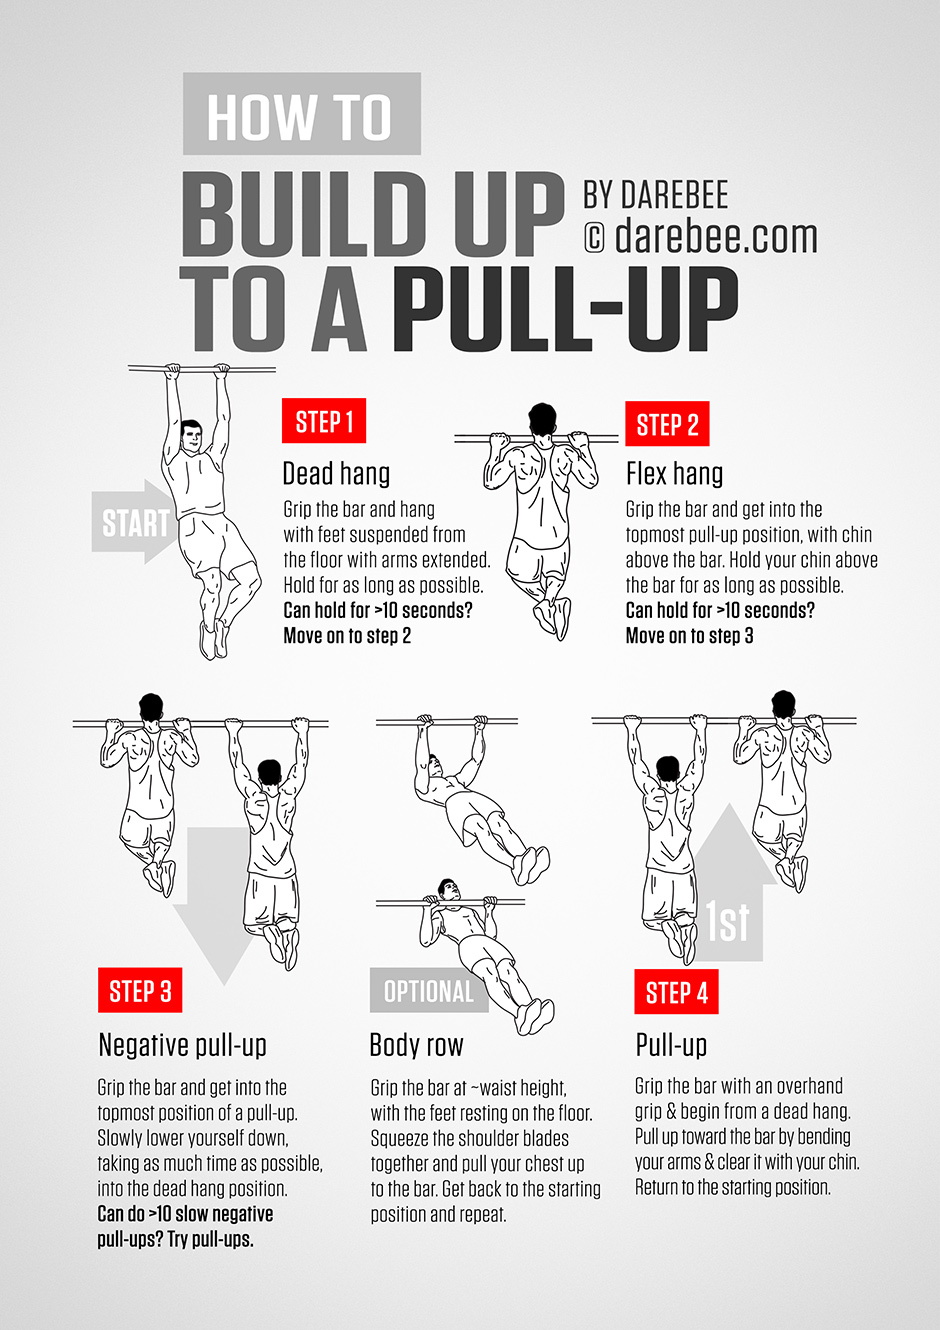 Wonderful Info About How To Improve Your Pull Ups - Internetdimension